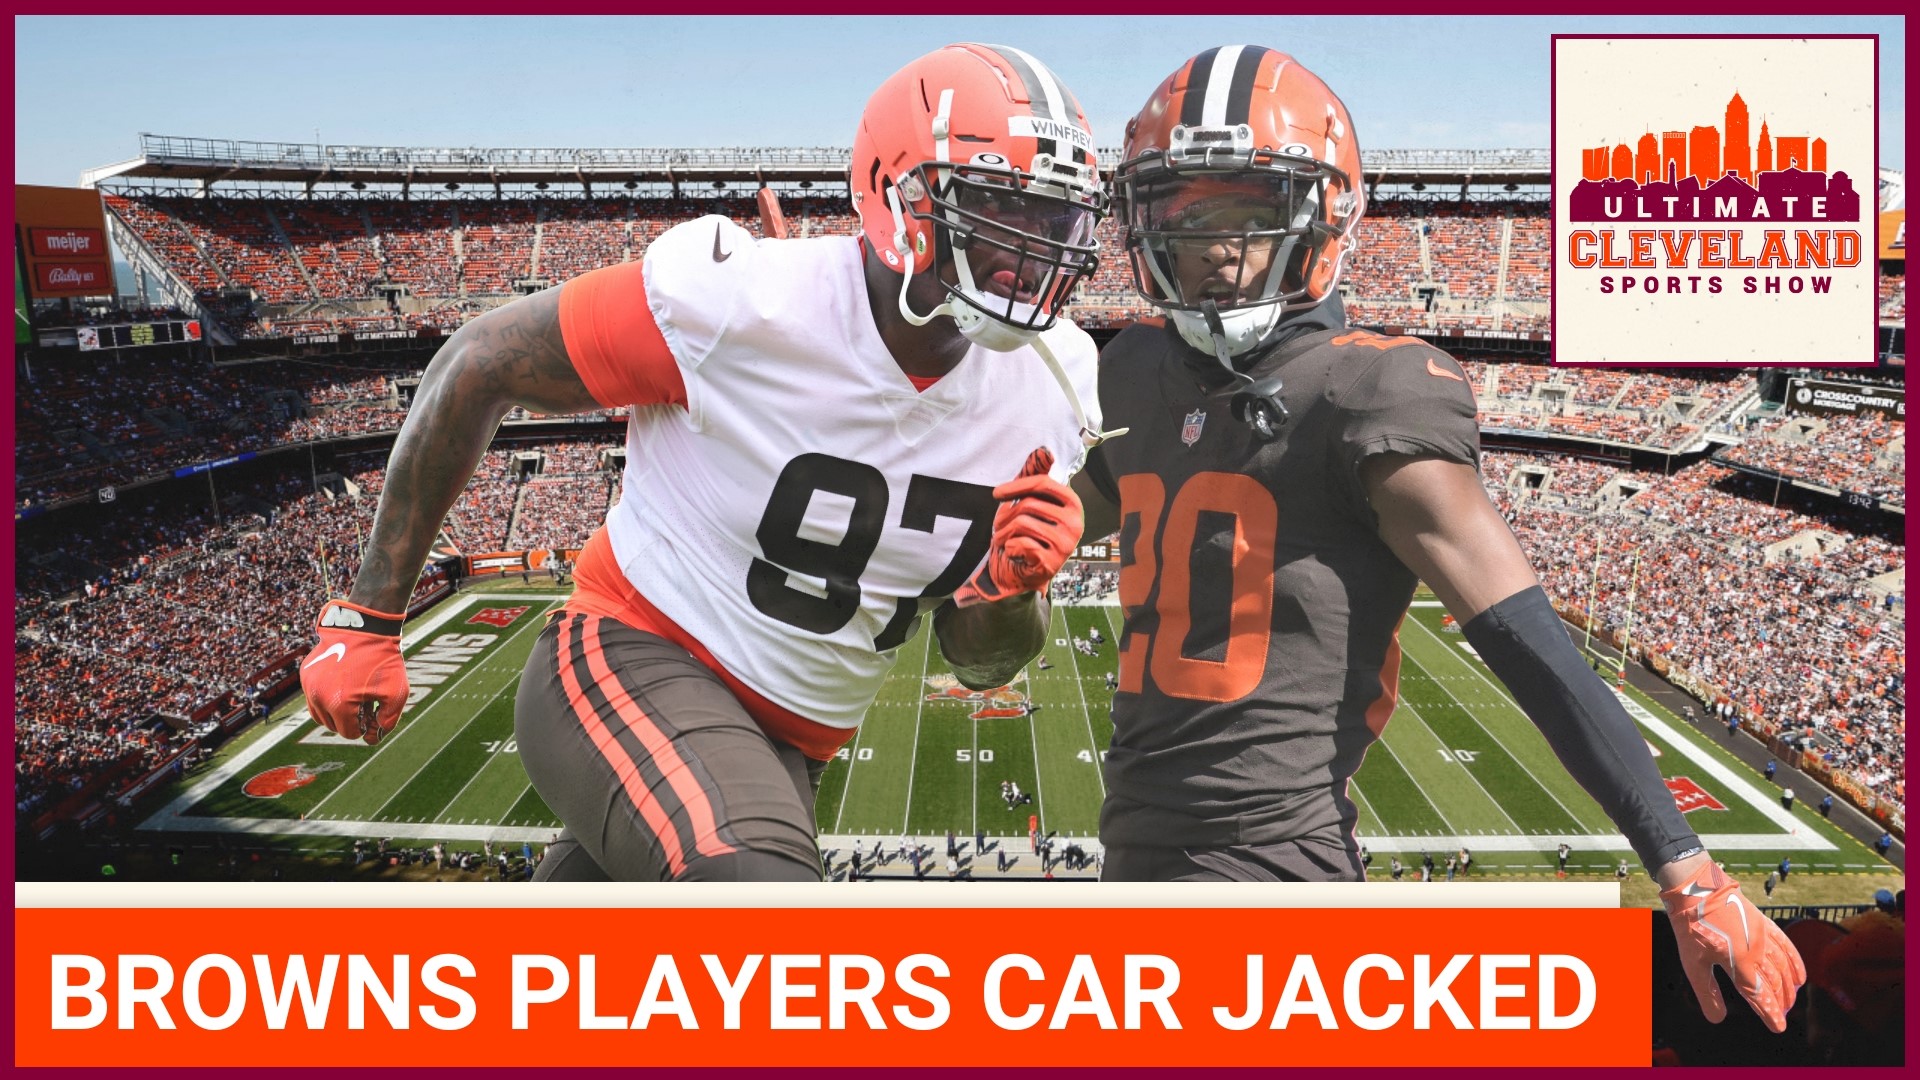 Greg Newsome among Cleveland Browns players apart of recent car jackings